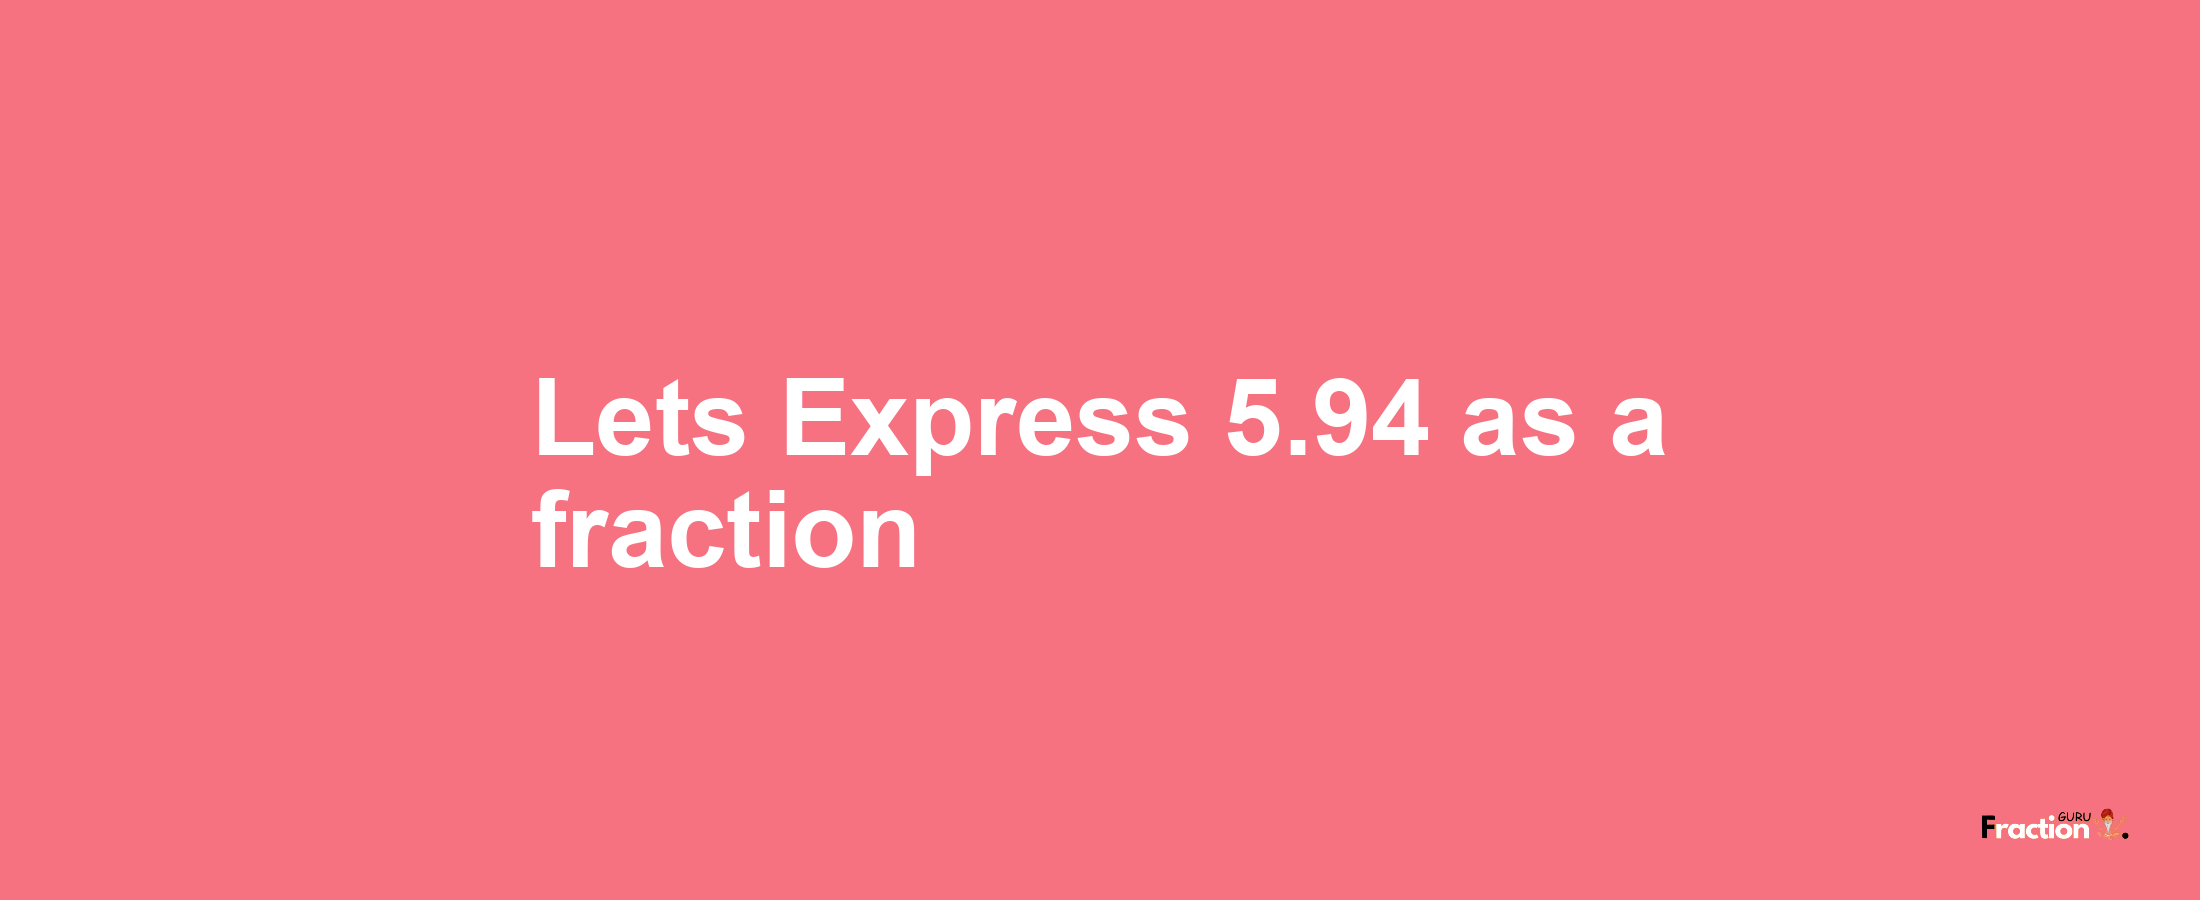 Lets Express 5.94 as afraction